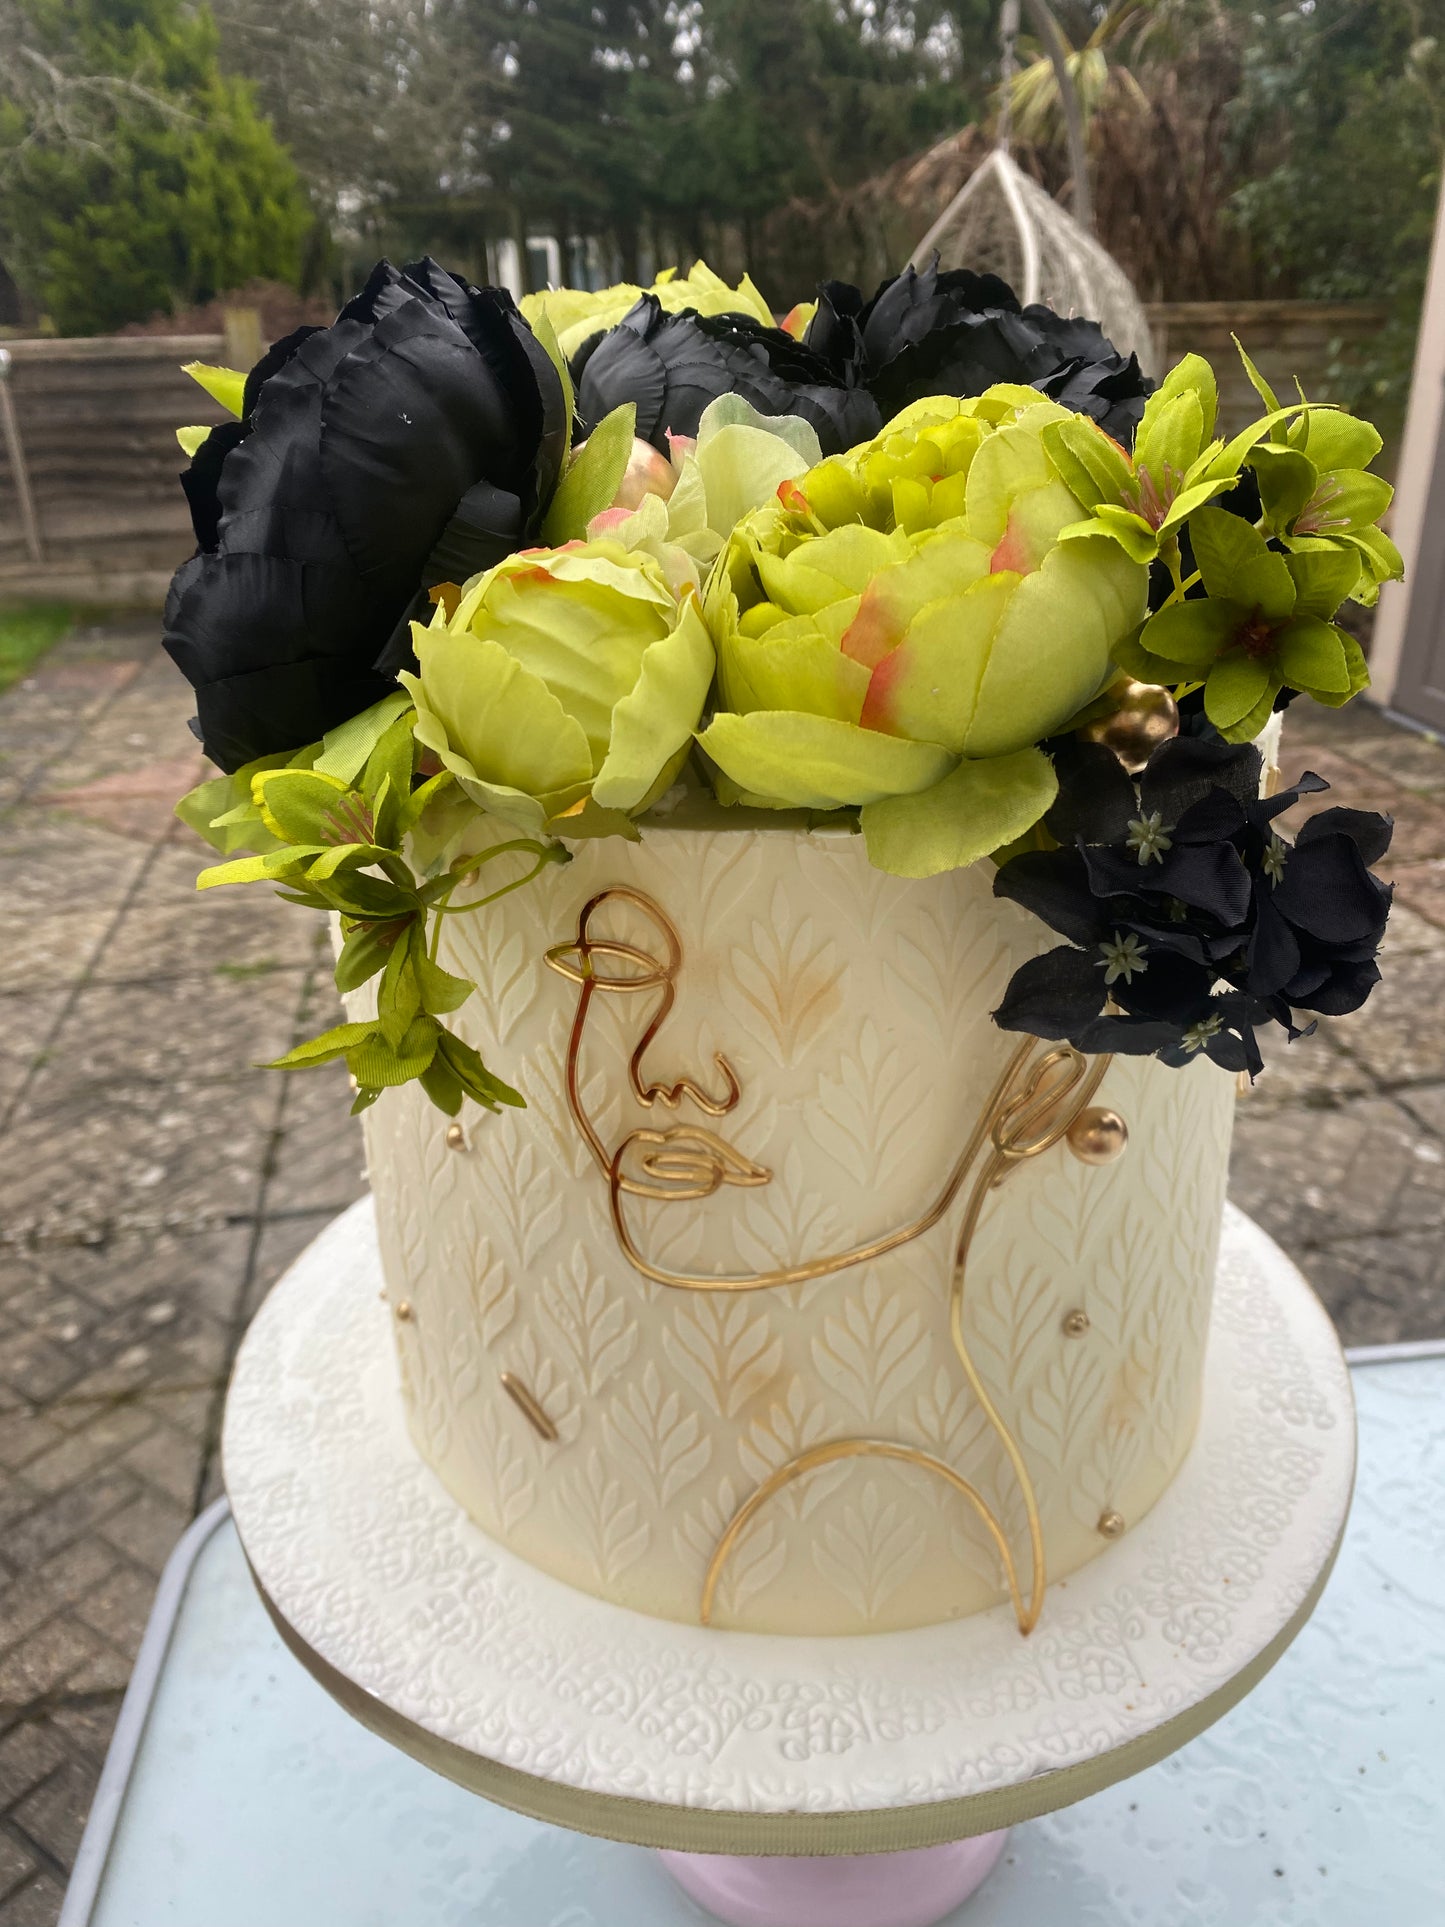 Lady acrylic silhouette with flower crown